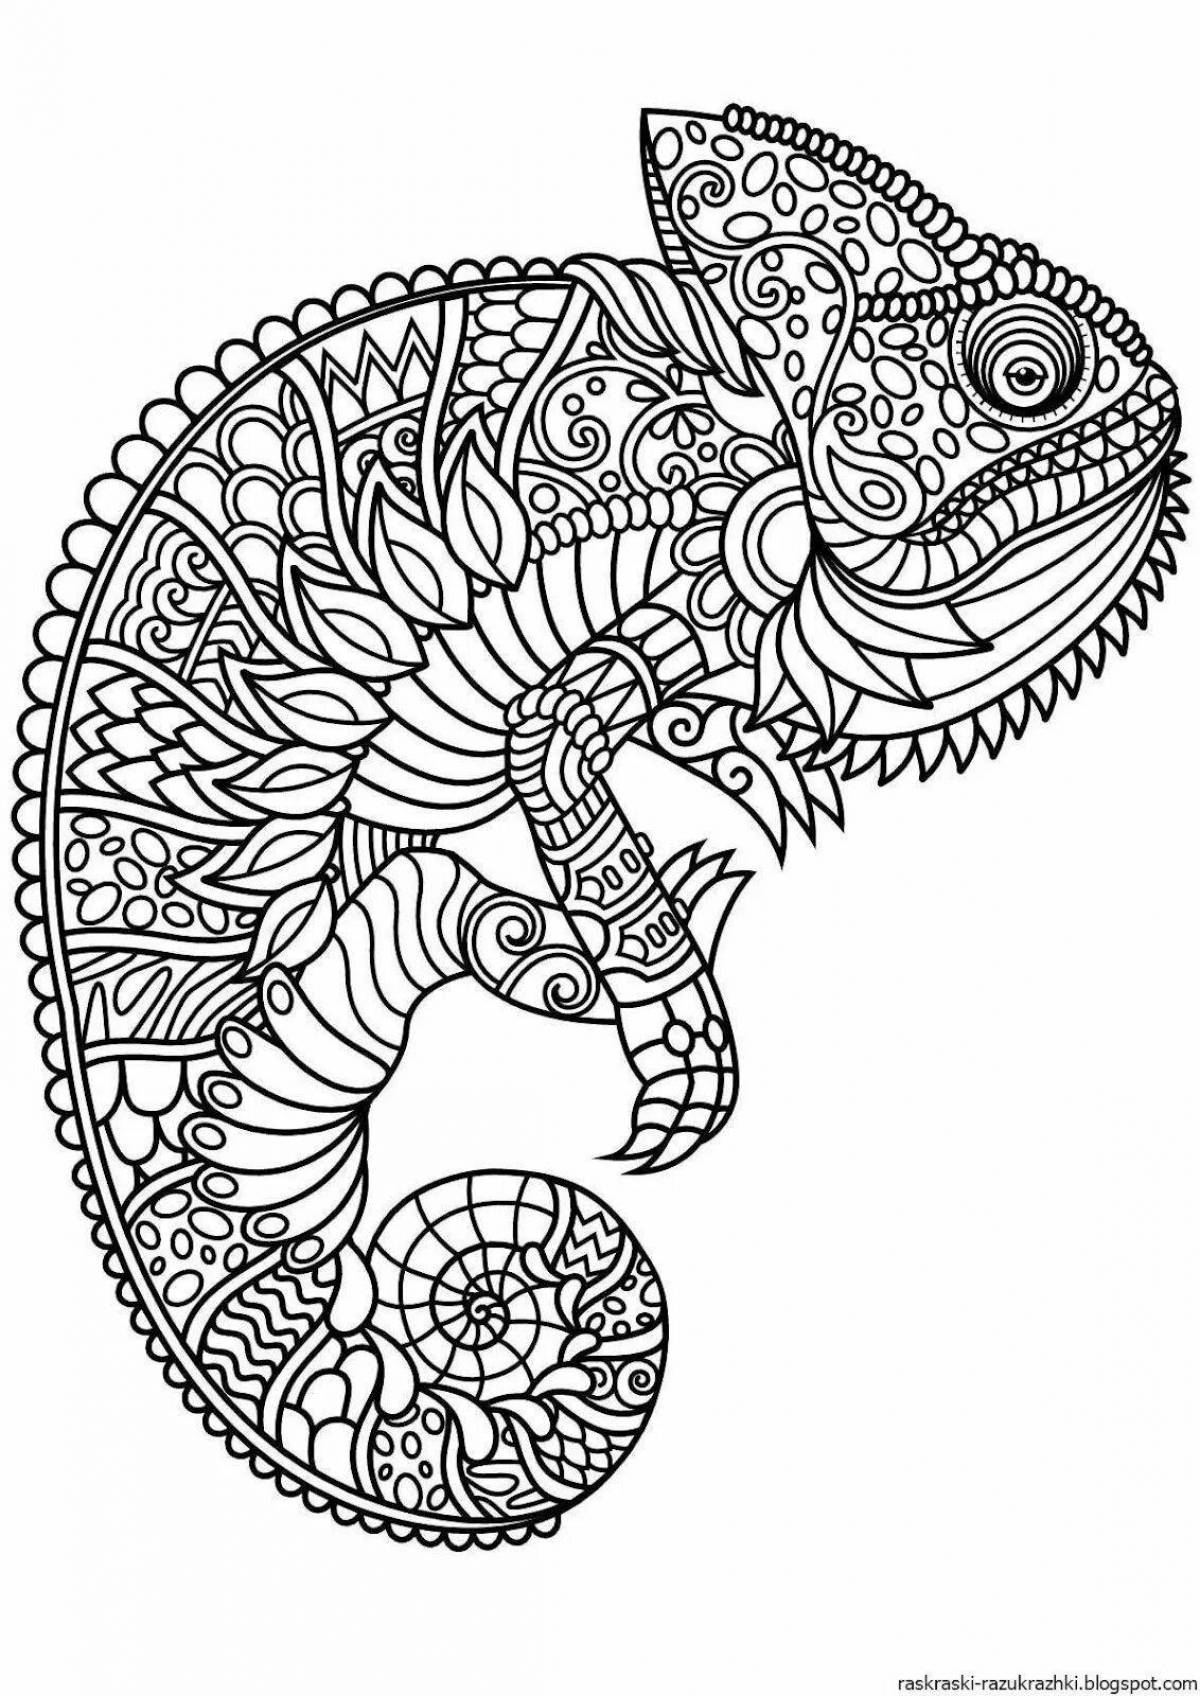 Exciting anti-stress animal coloring book